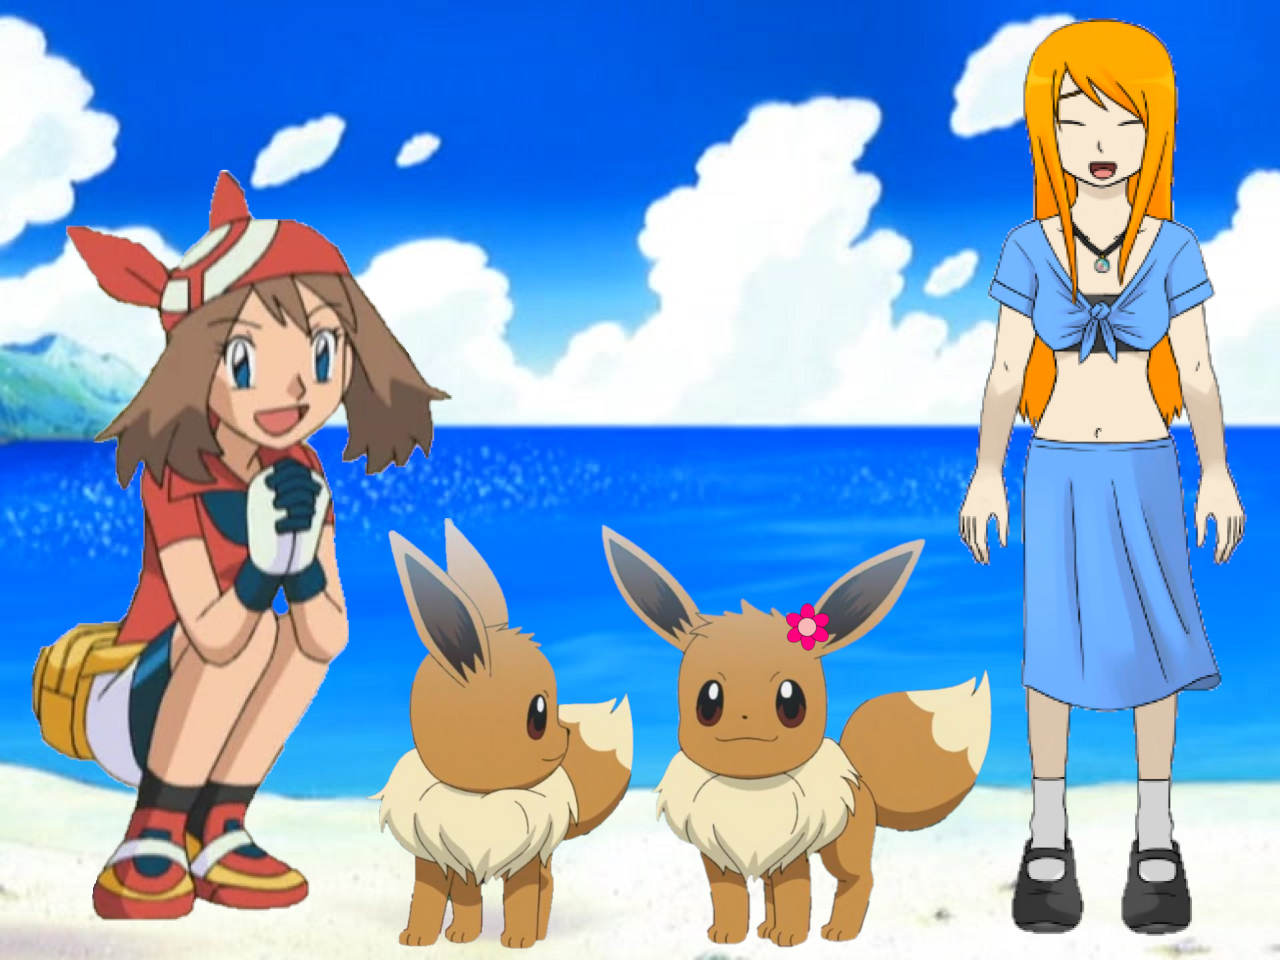 Pokemon Quest: Two Girls and their Eevees by WillDinoMaster55 on DeviantArt